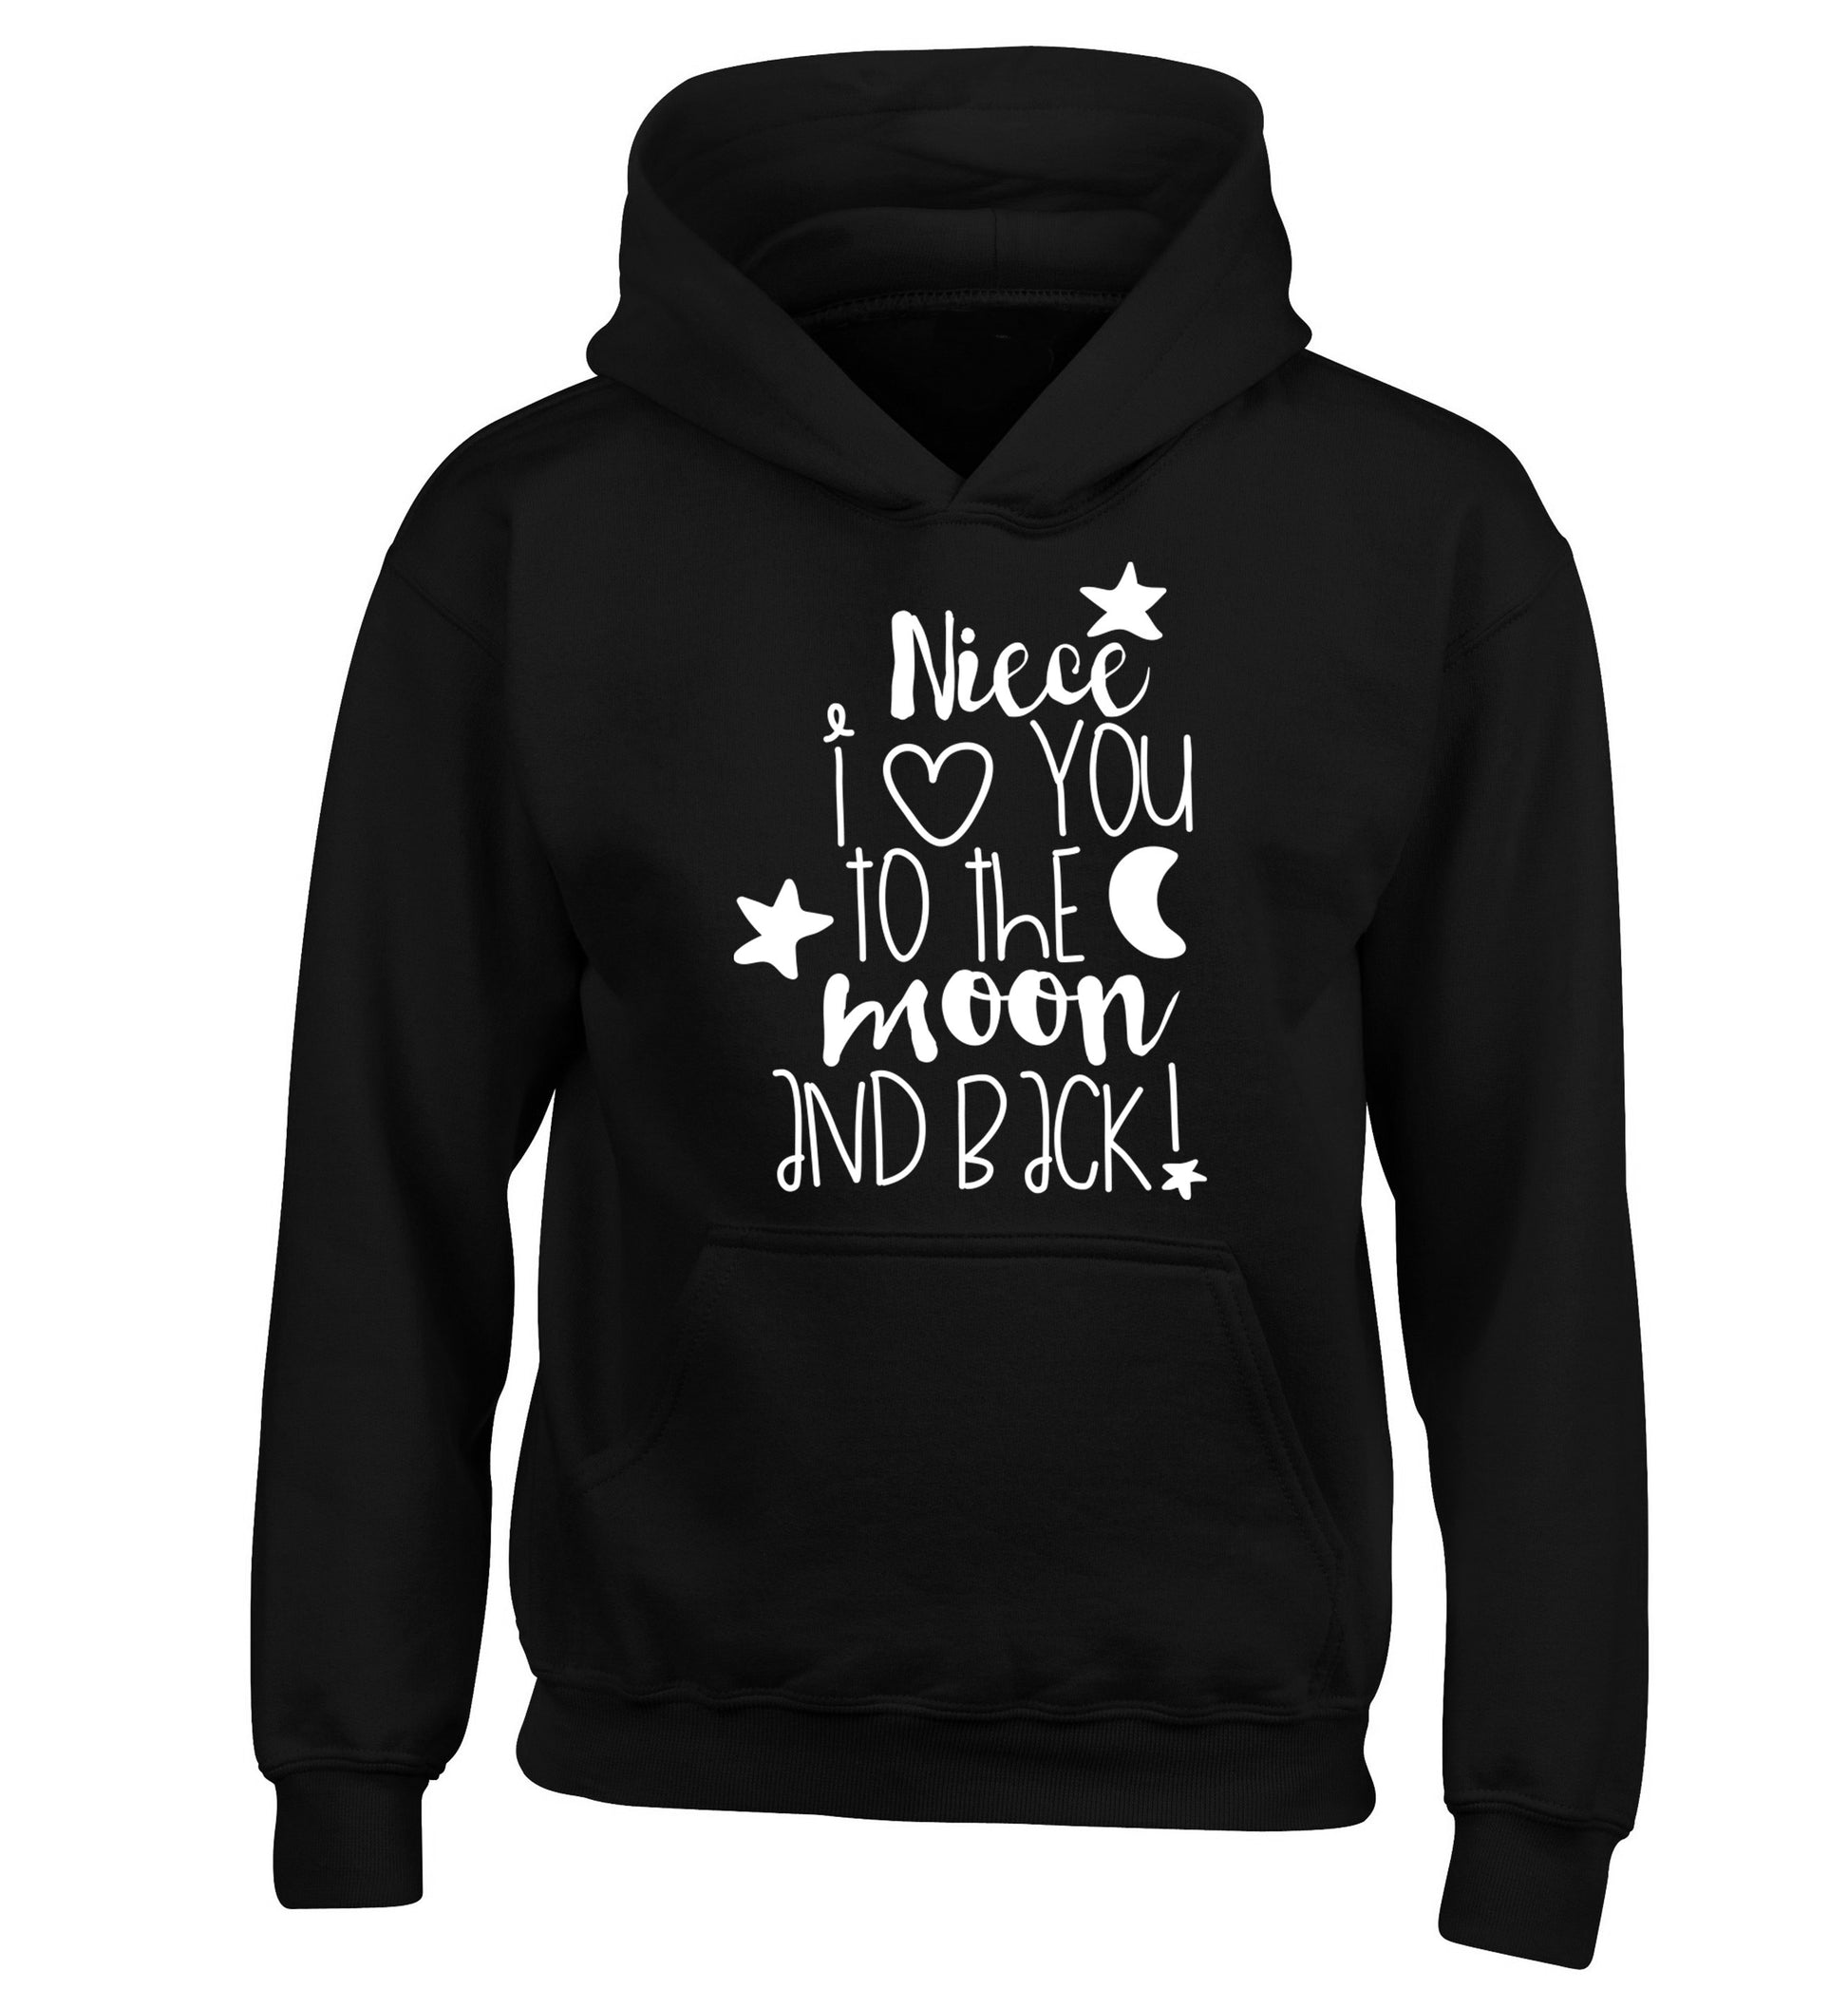 Niece I love you to the moon and back children's black hoodie 12-14 Years